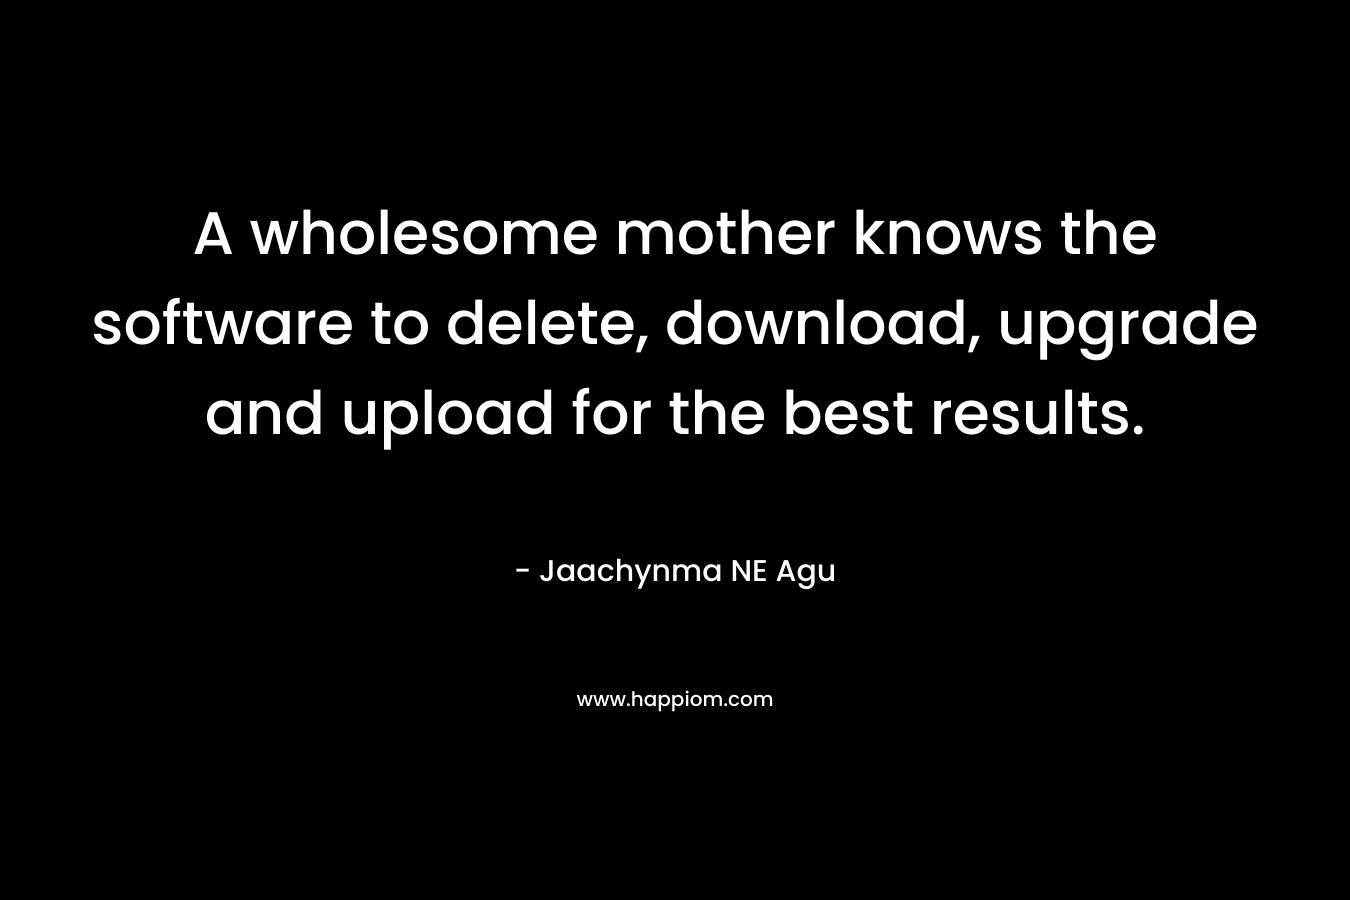 A wholesome mother knows the software to delete, download, upgrade and upload for the best results. – Jaachynma NE Agu